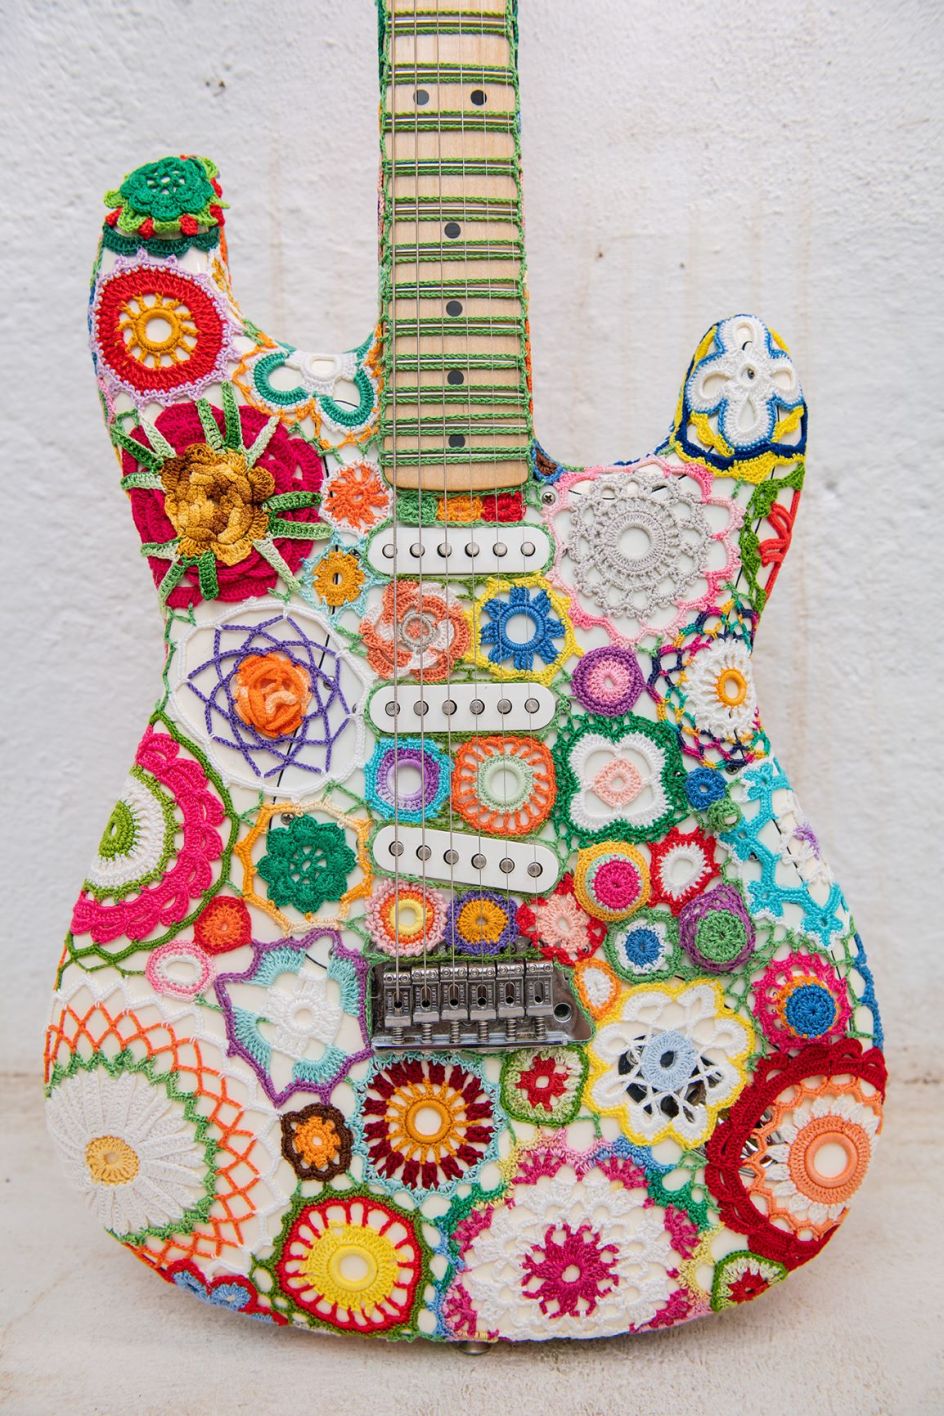 Guitar by Joana Vasconcelos. Image © Louise Haywood-Schiefer